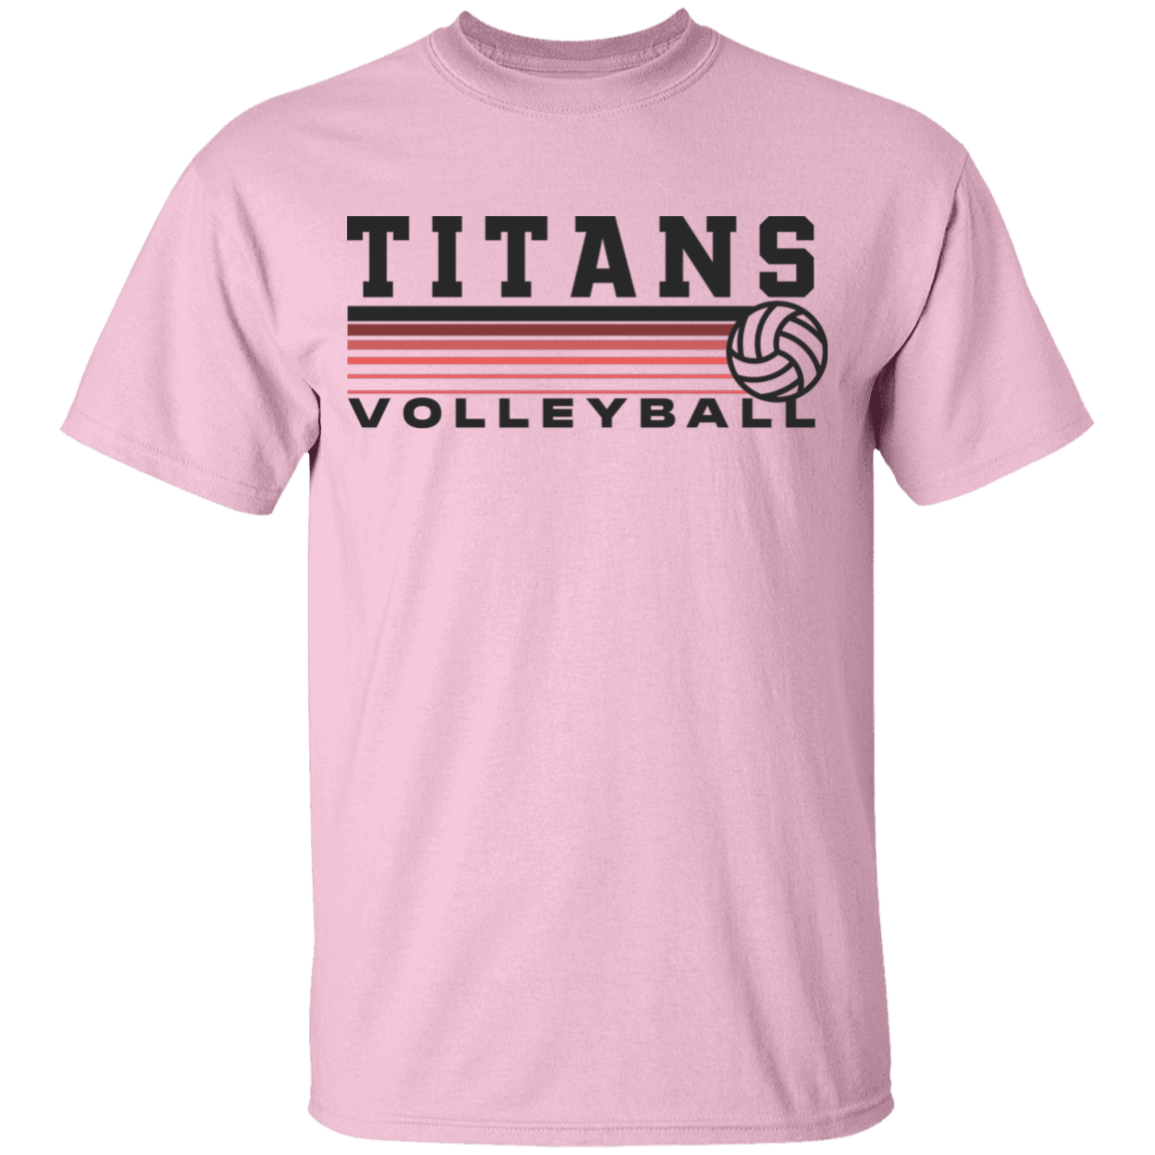 TITANS Volleyball Youth 100% Cotton T-Shirt